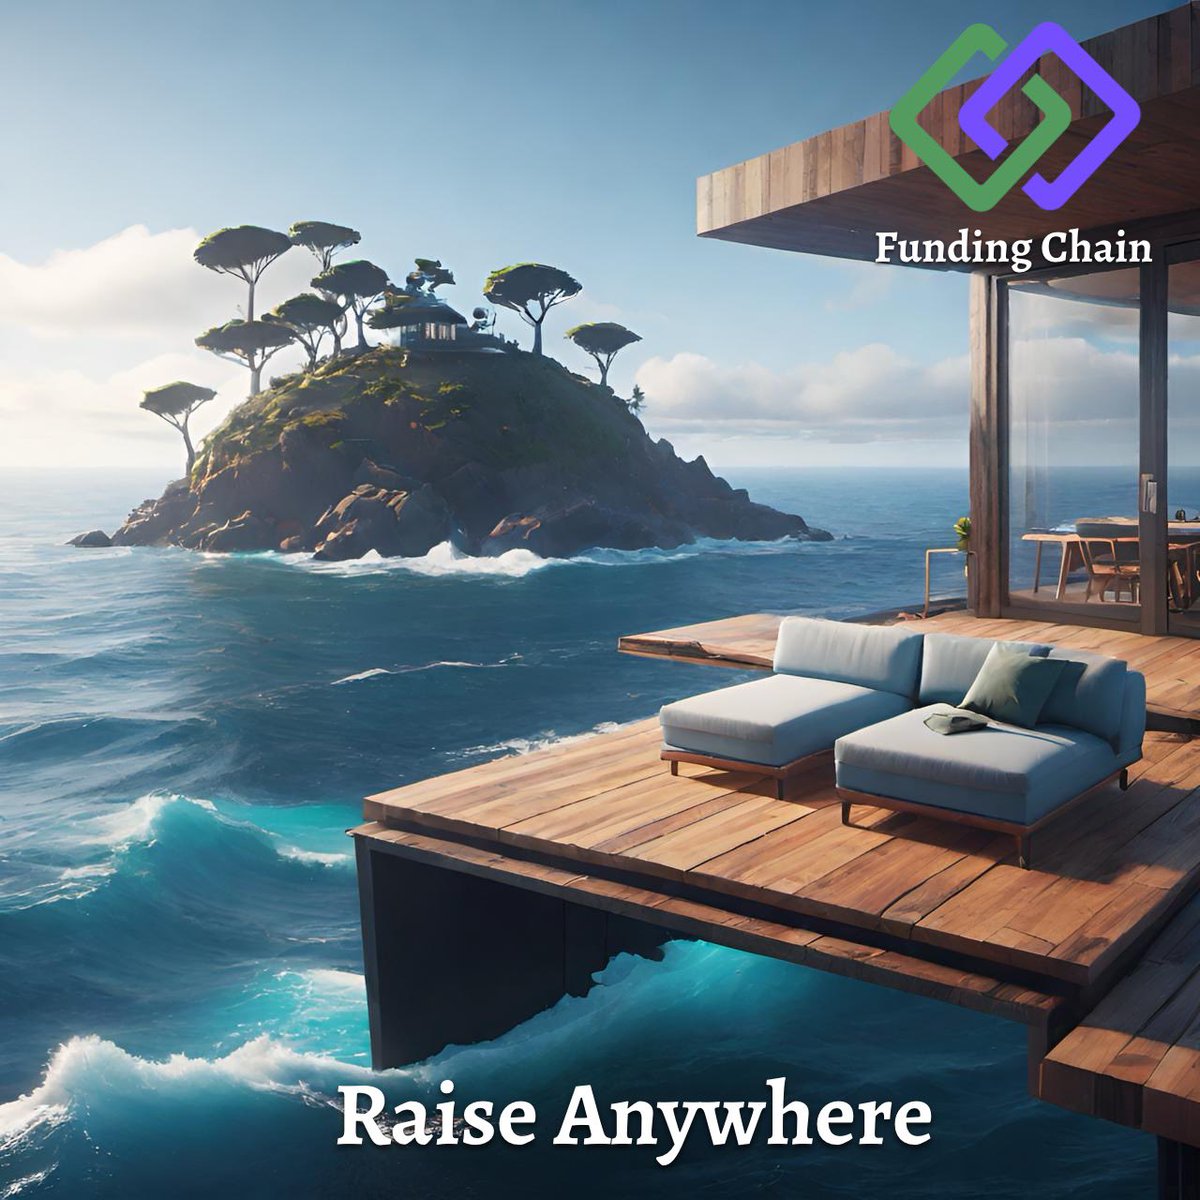 @MuseZack And new tech for crowdfunding like funding chain. 

Raise Anywhere. Raise Any Time with Funding Chain. A gofundme with your individual smart contract to provide autonomy and flow for your film, tech startup, business, non-profit, or unique event of life. 

#blockchain #crowdfund